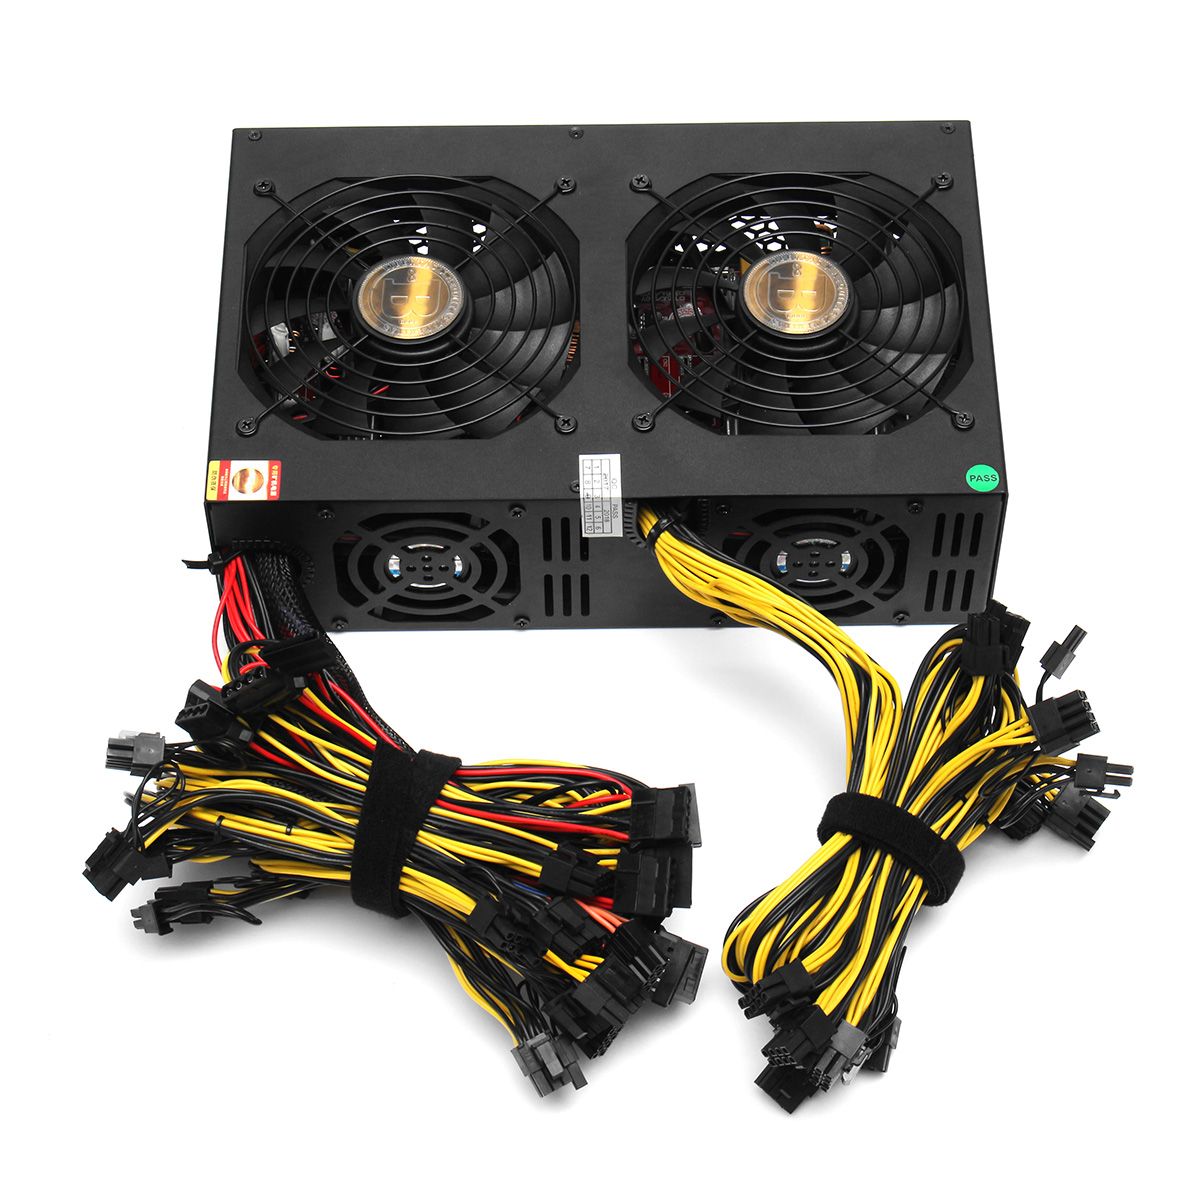 3450W-Miner-Power-Supply-140mm-Cooling-Fan-ATX-12V-Version-231-Computer-Power-Supply-Mining-1229305